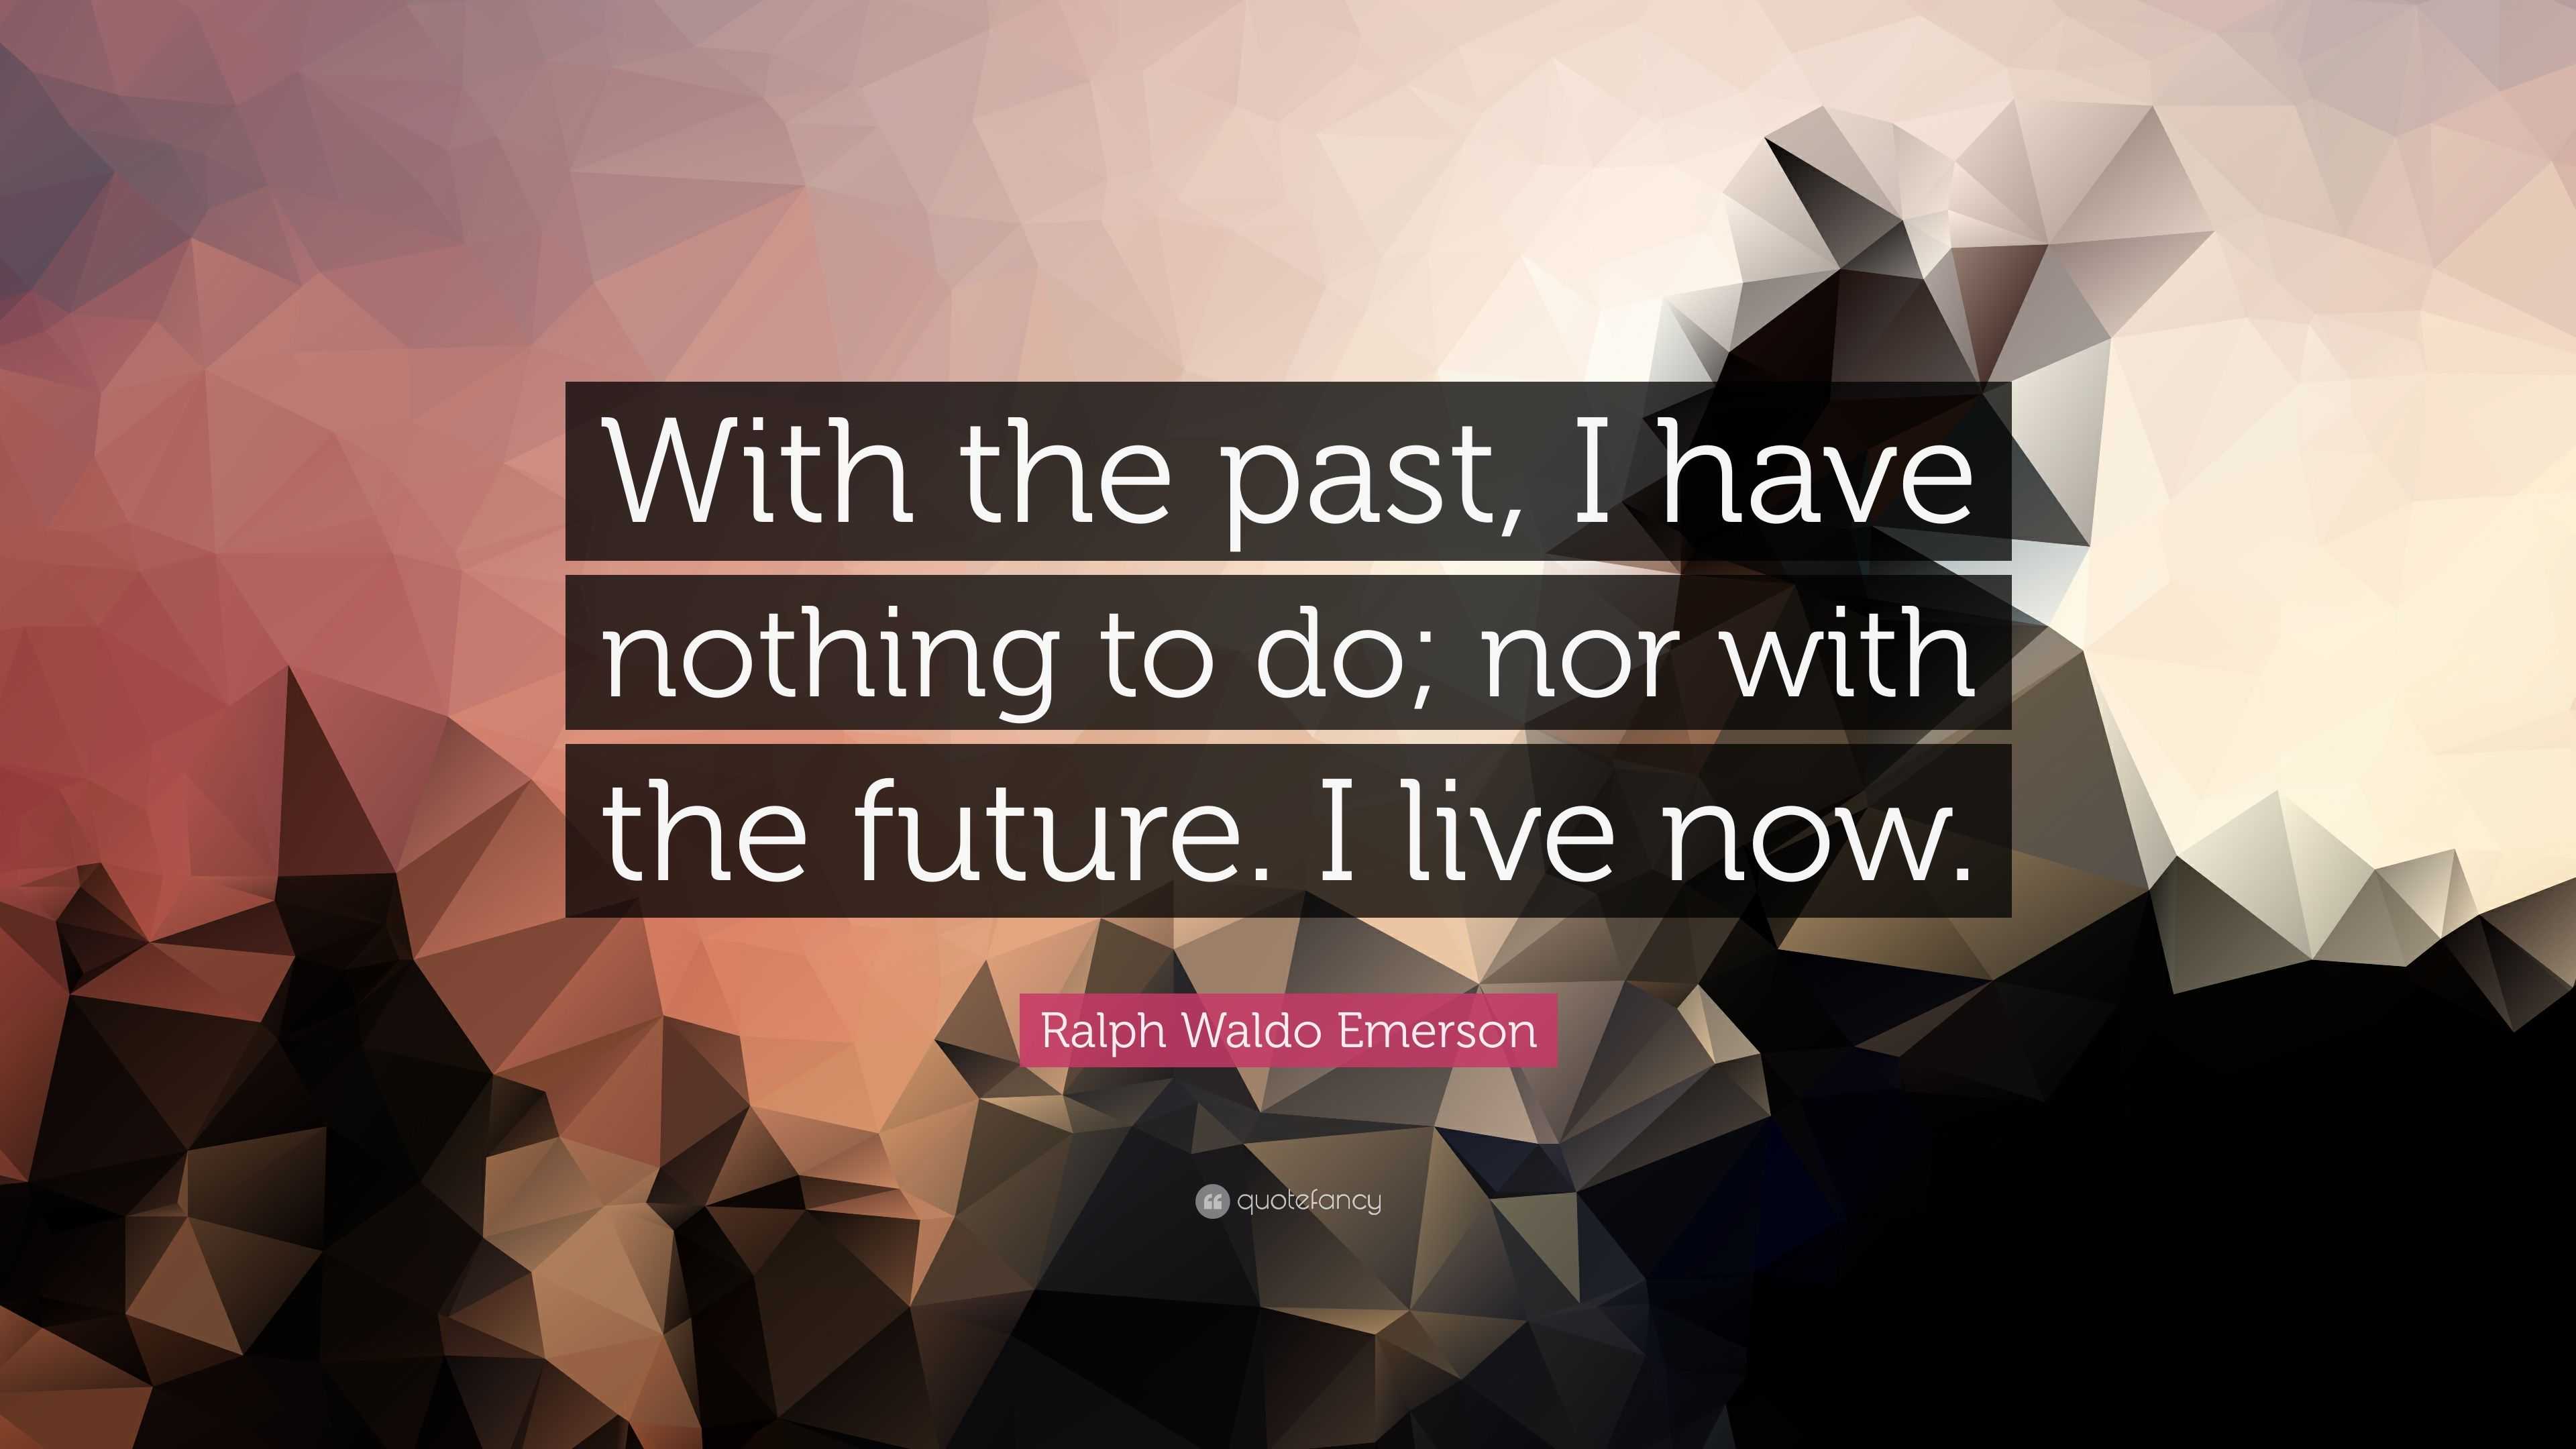 Ralph Waldo Emerson Quote: “With the past, I have nothing to do; nor ...